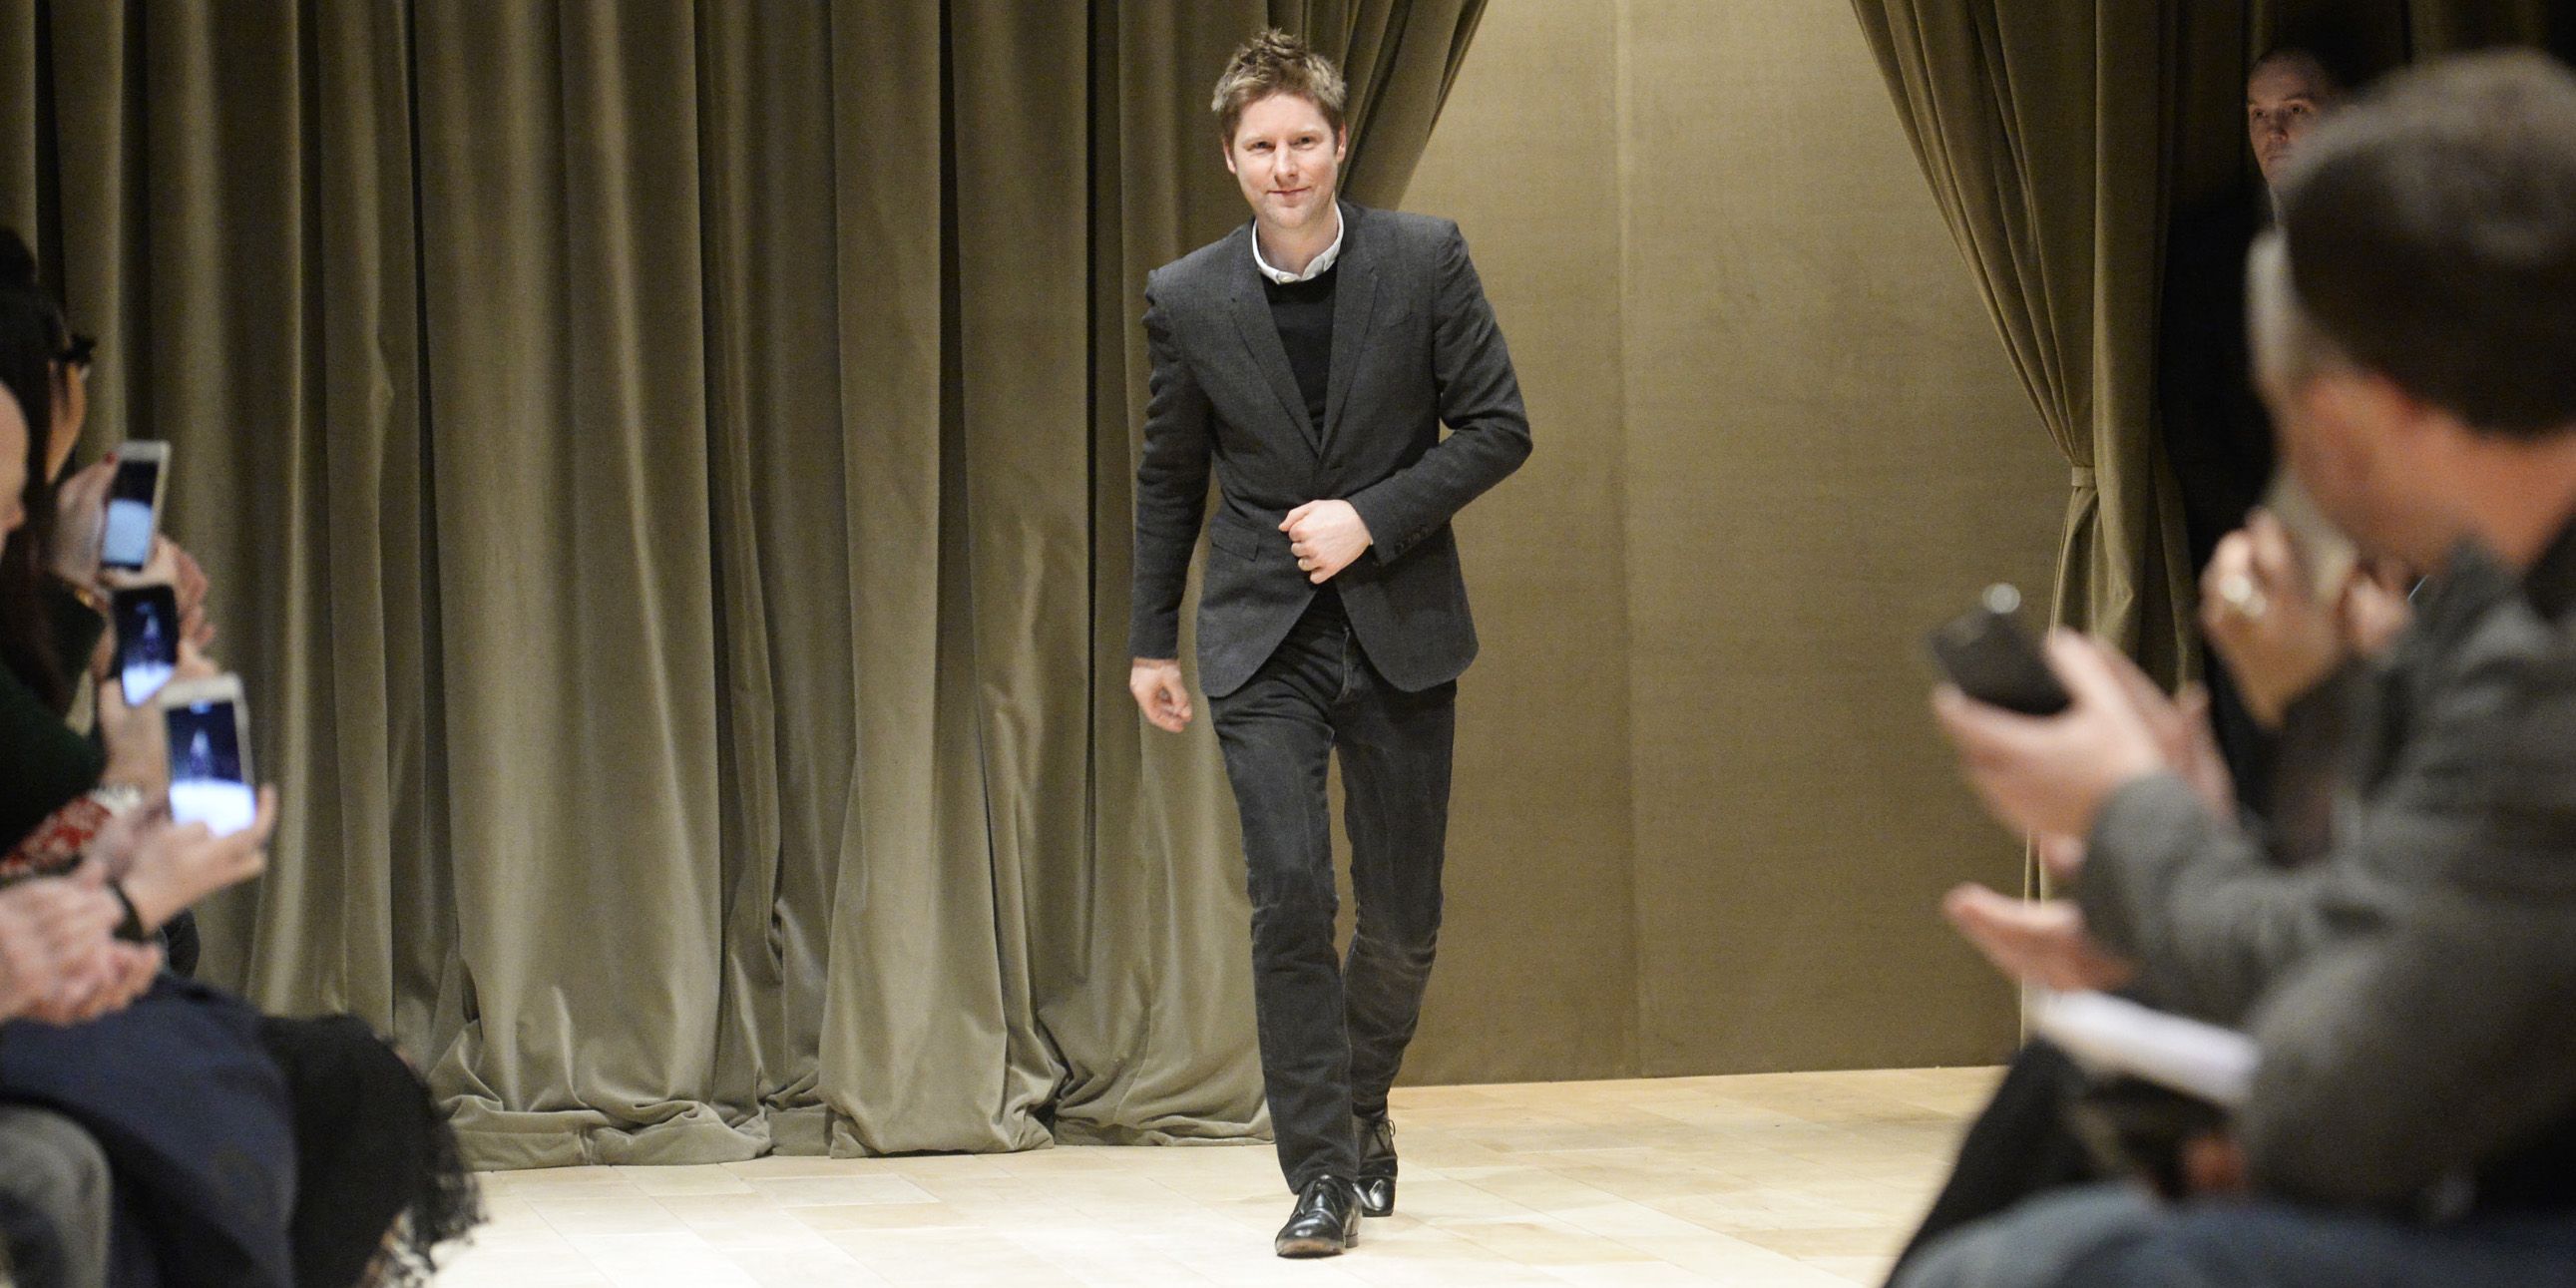 Christopher Bailey to Receive CBE from Queen for His Work at Burberry